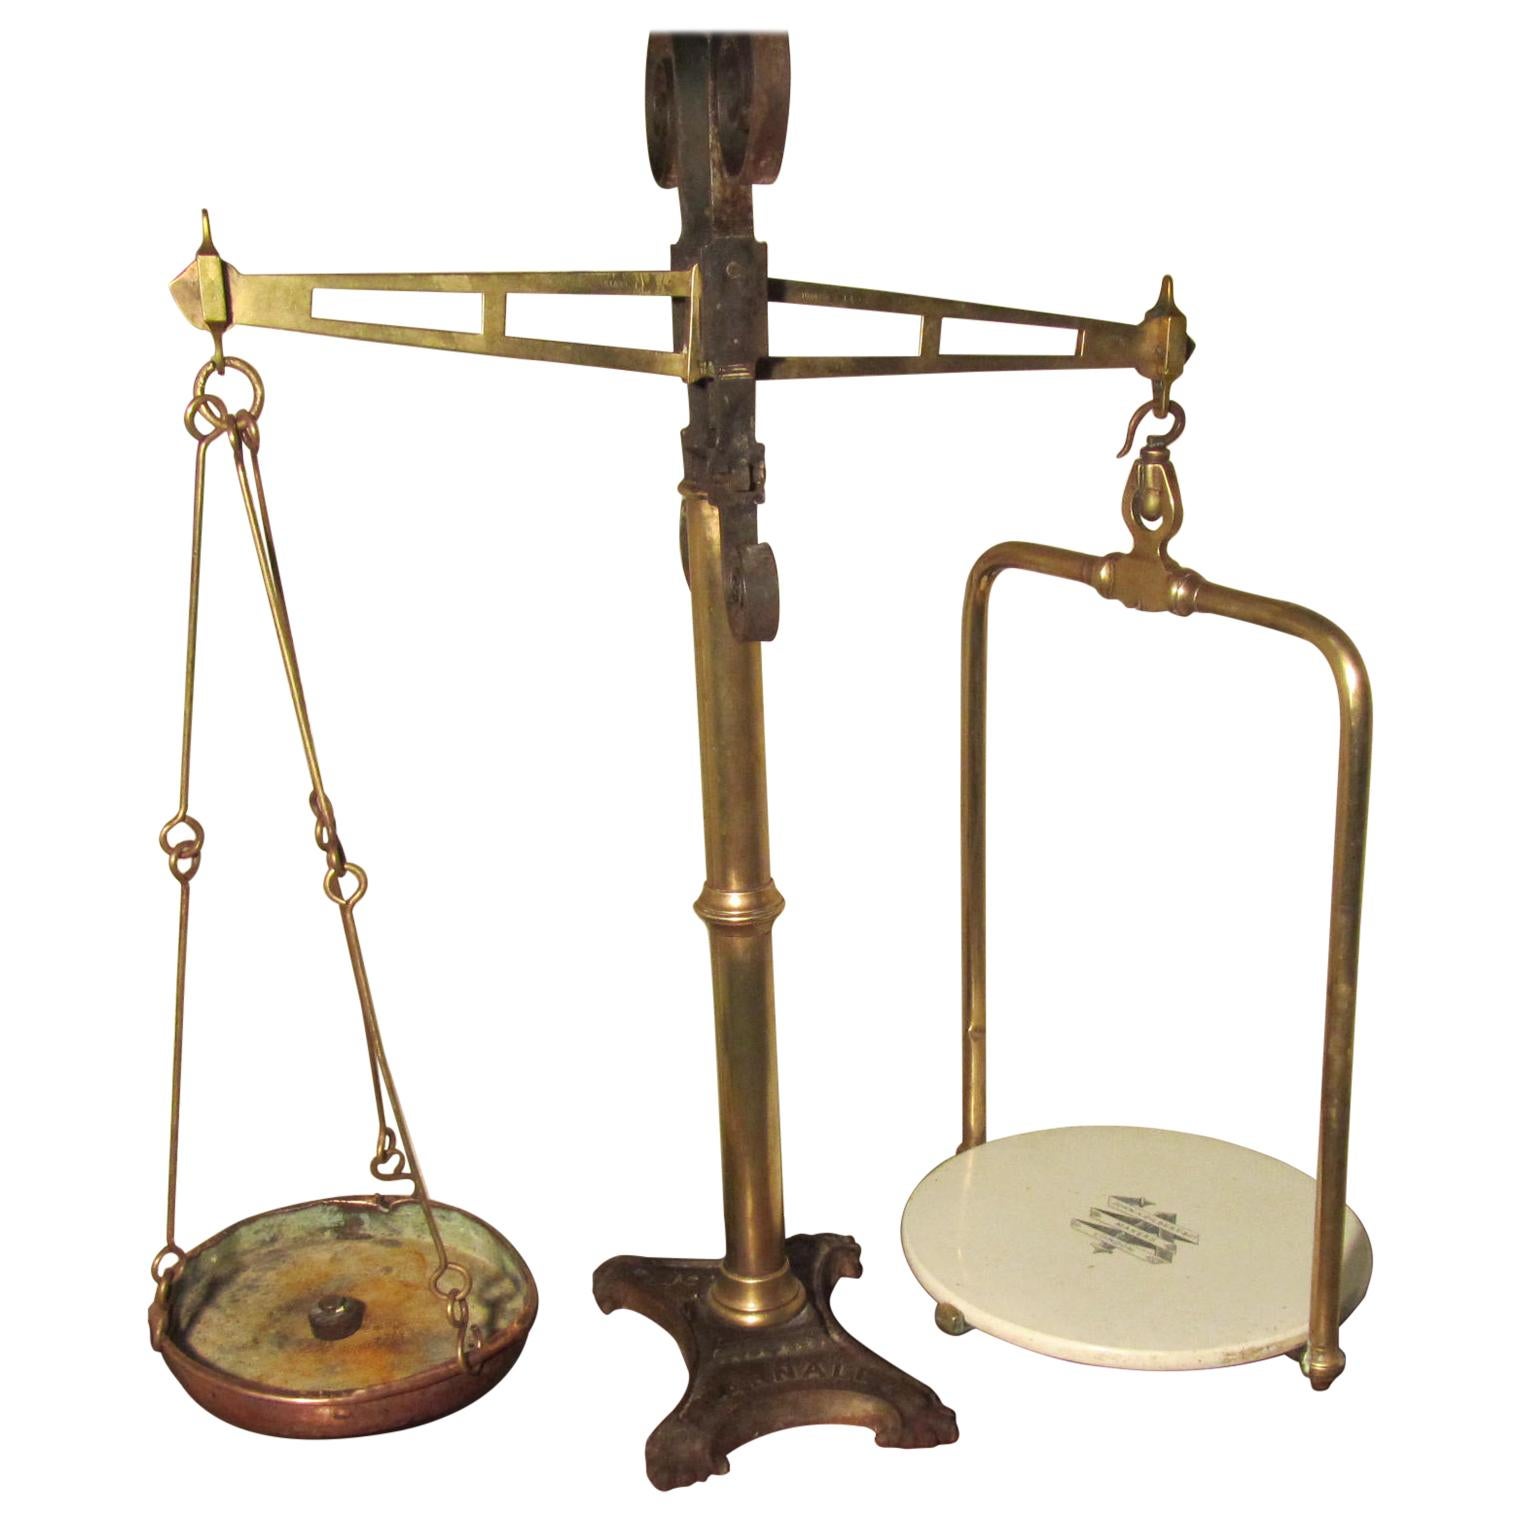 Dairy Balance Scales by Parnall of Bristol